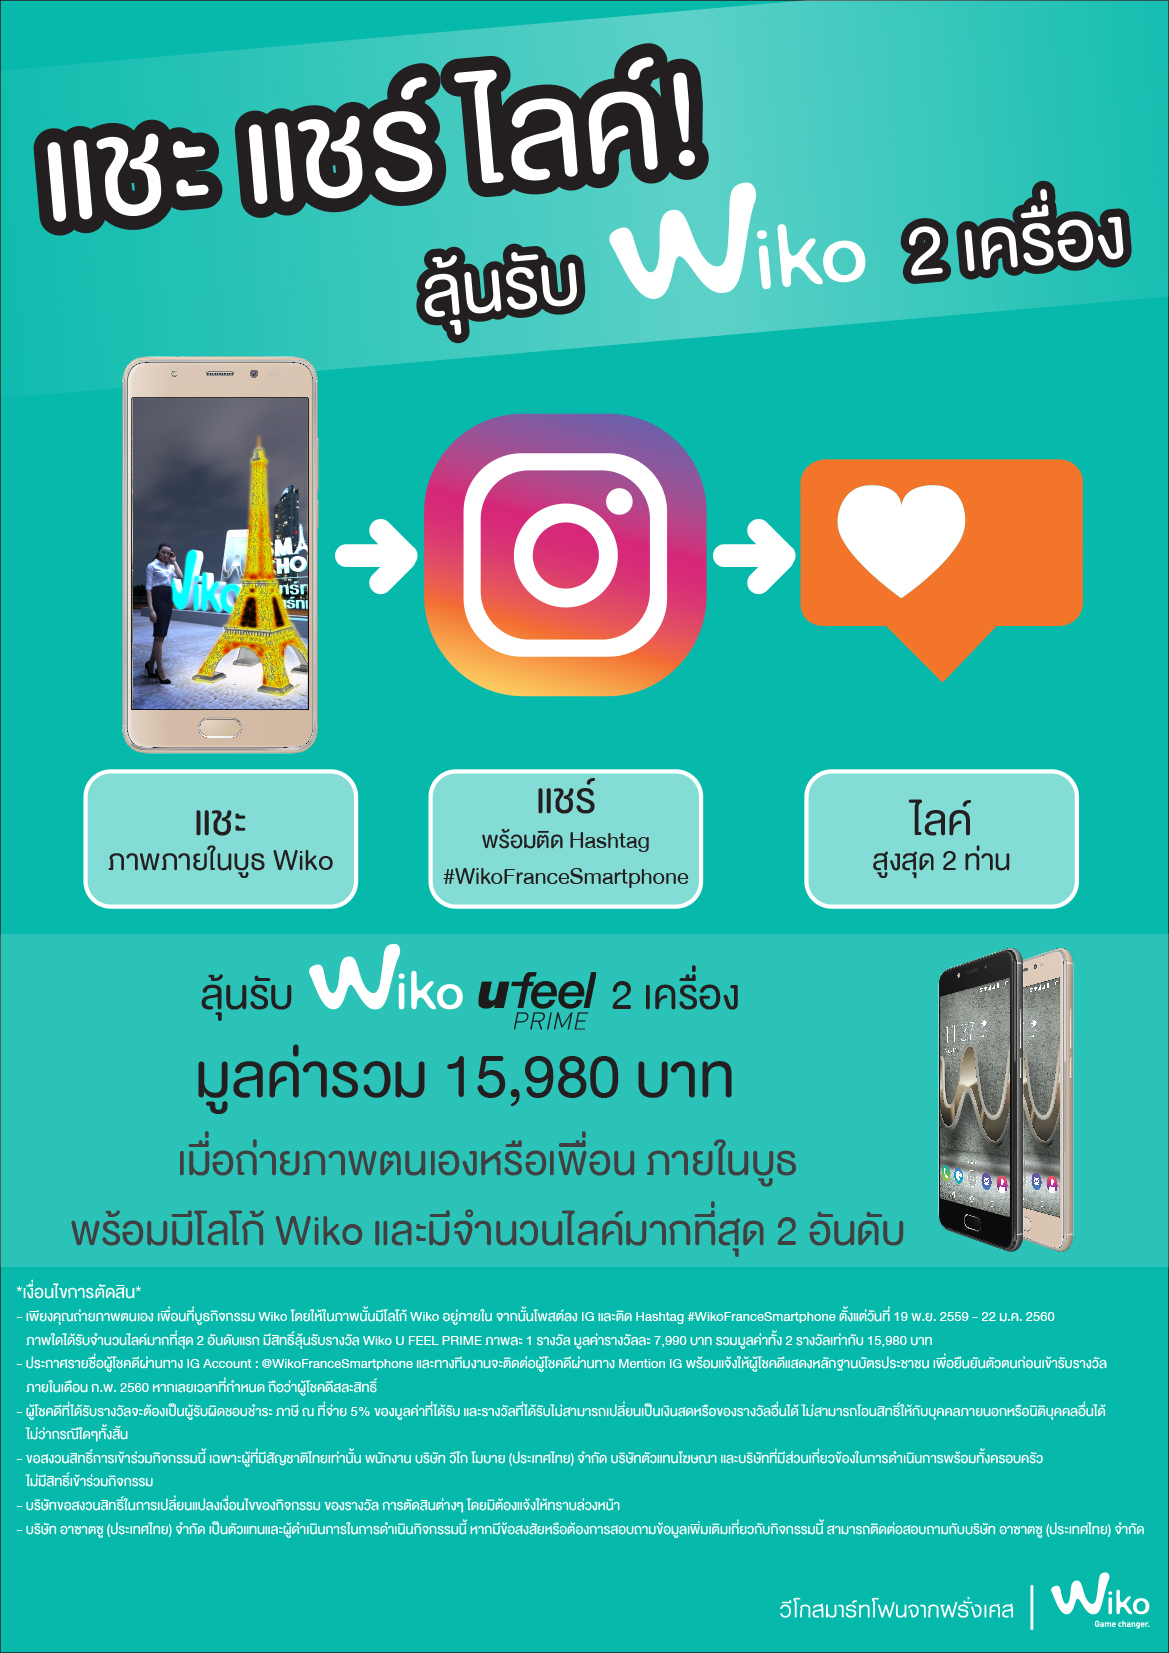 FW AW Wiko A3 Stand 21-11-59